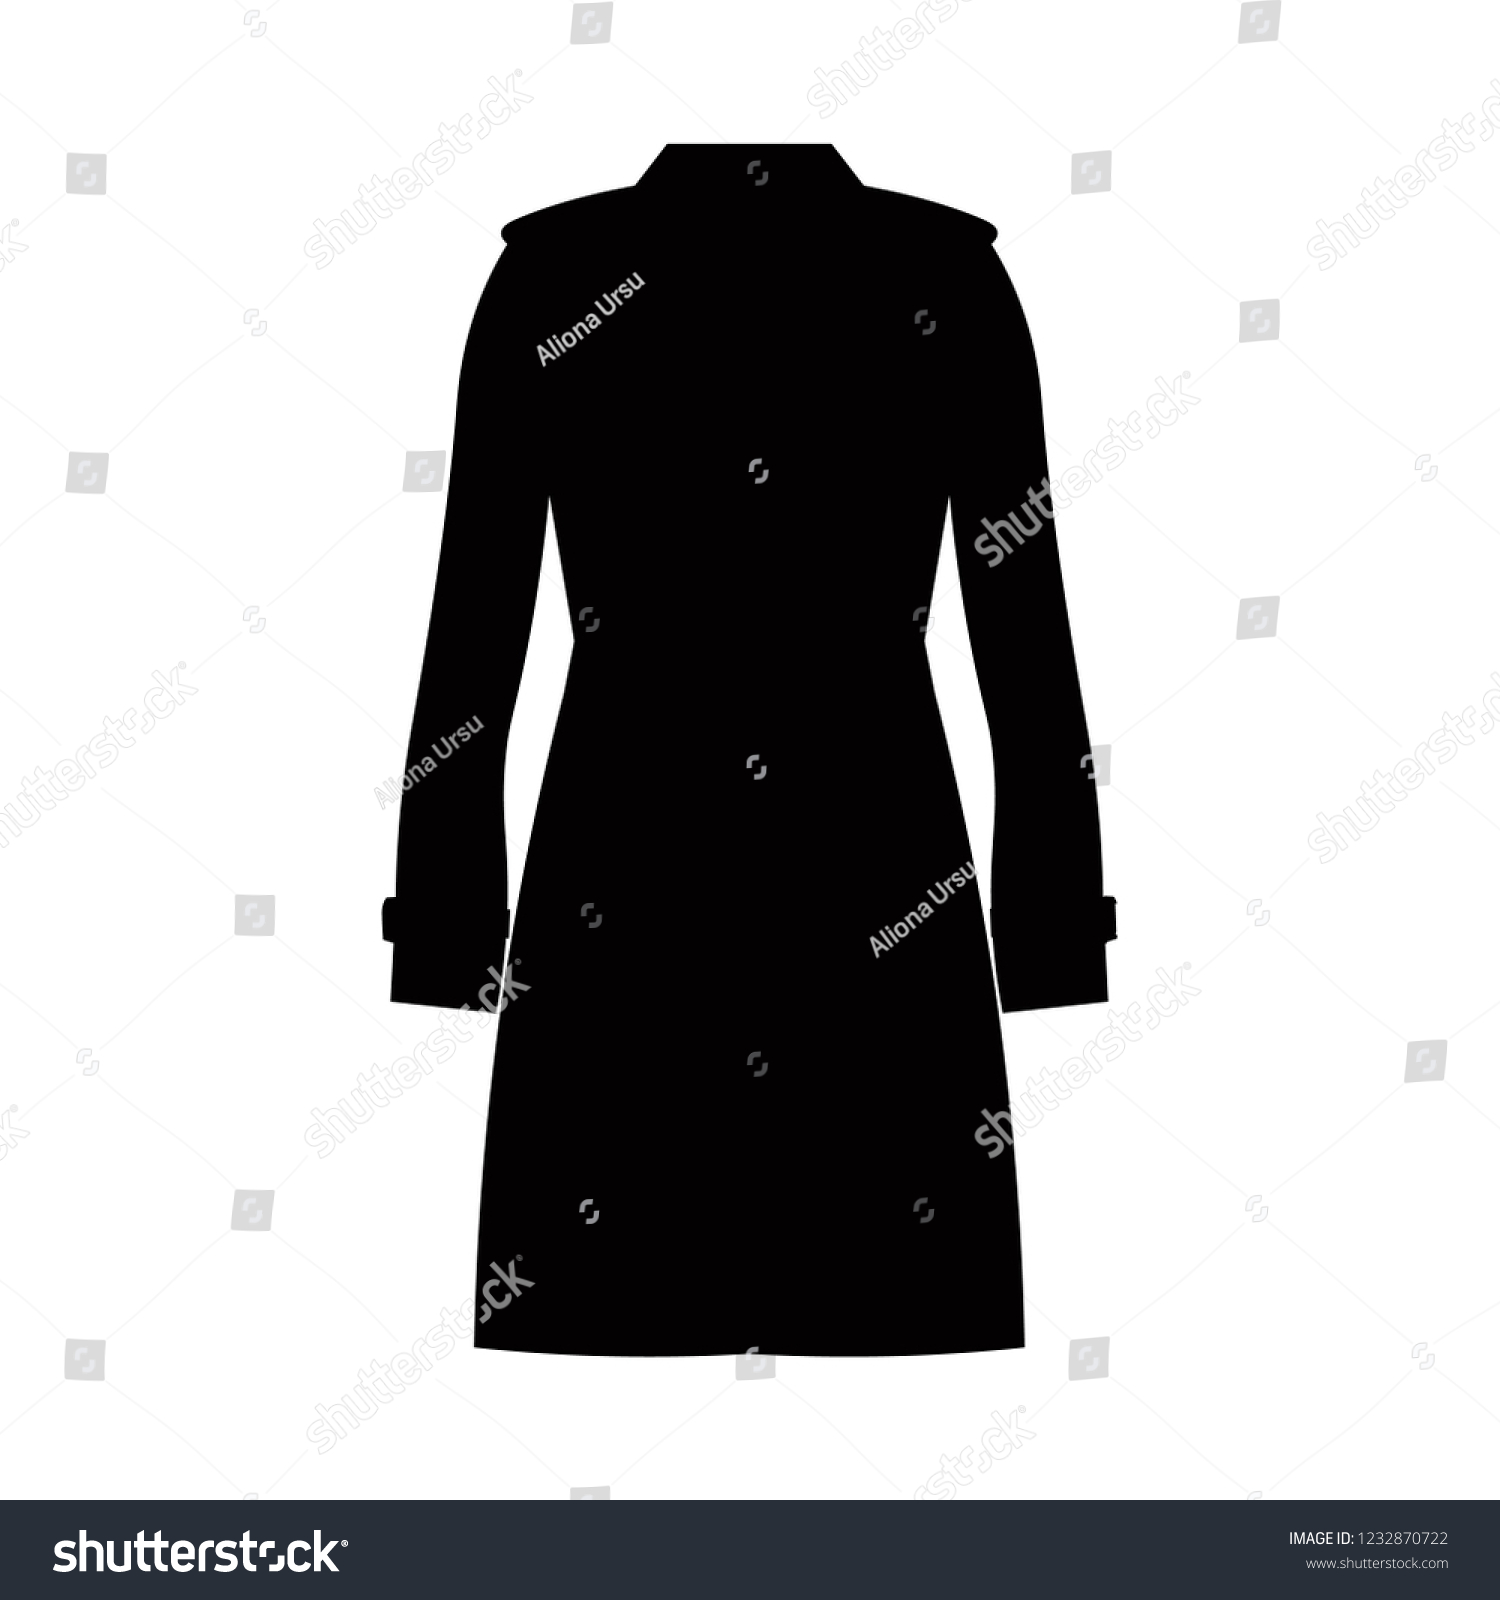 Trench Coat Silhouette Icon Clothes Vector Stock Vector (Royalty Free ...